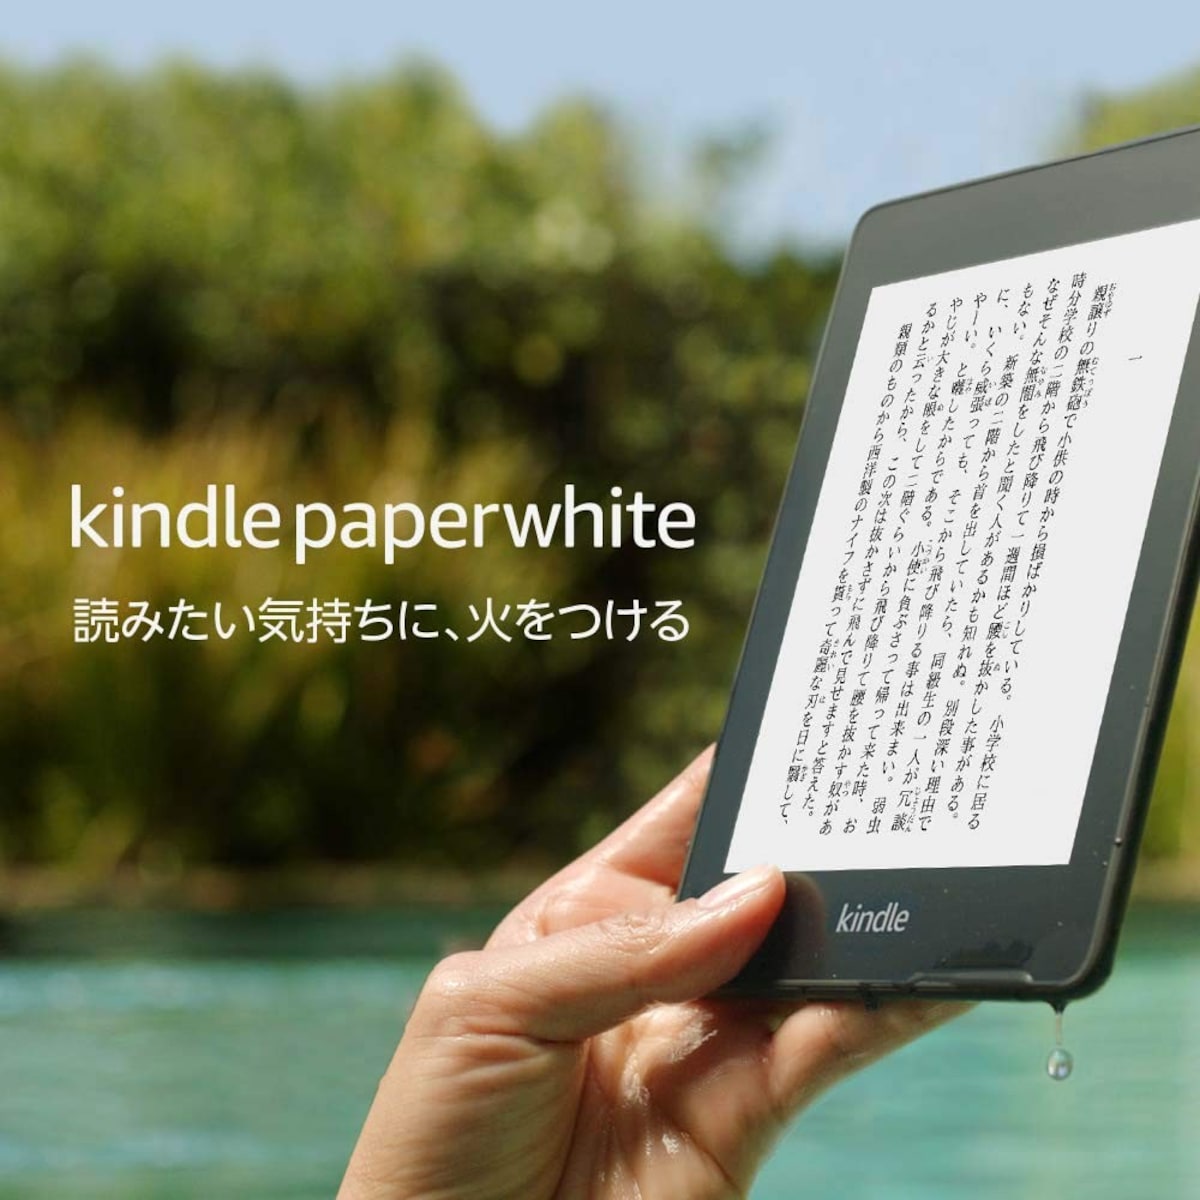 Kindle Paperwhite 電子書籍リーダー